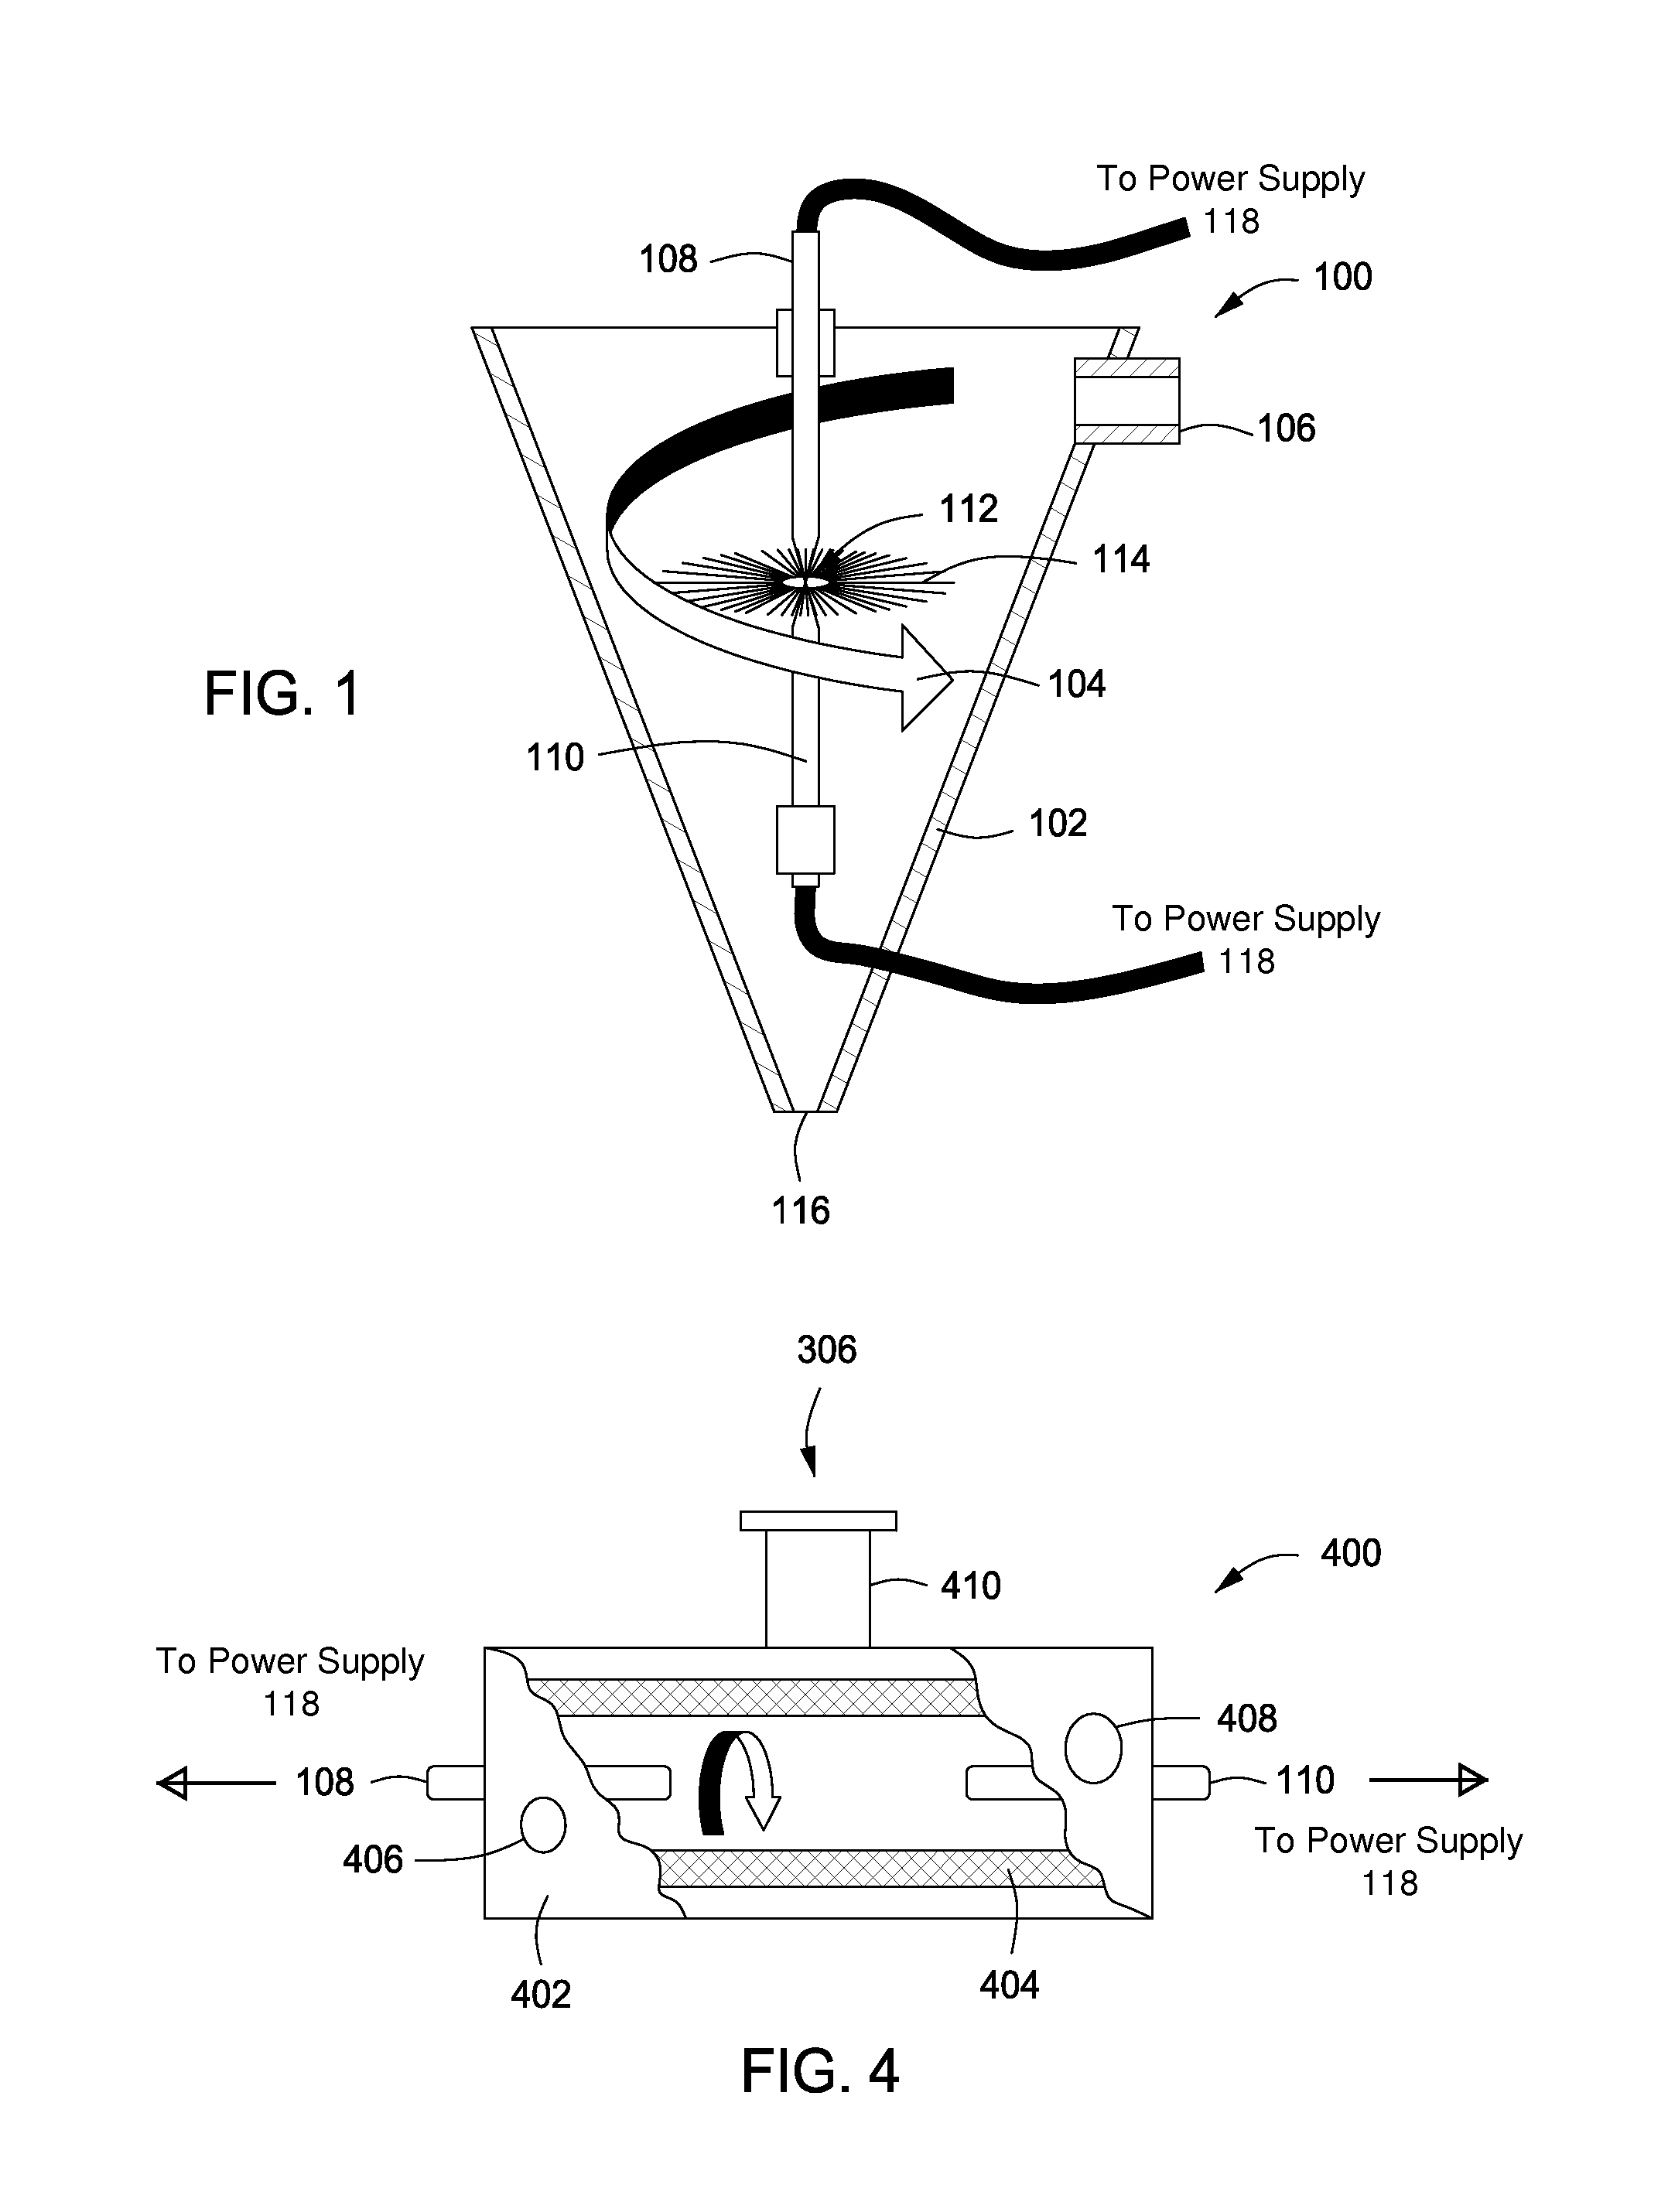 System for treating a substance with wave energy from an electrical arc and a second source